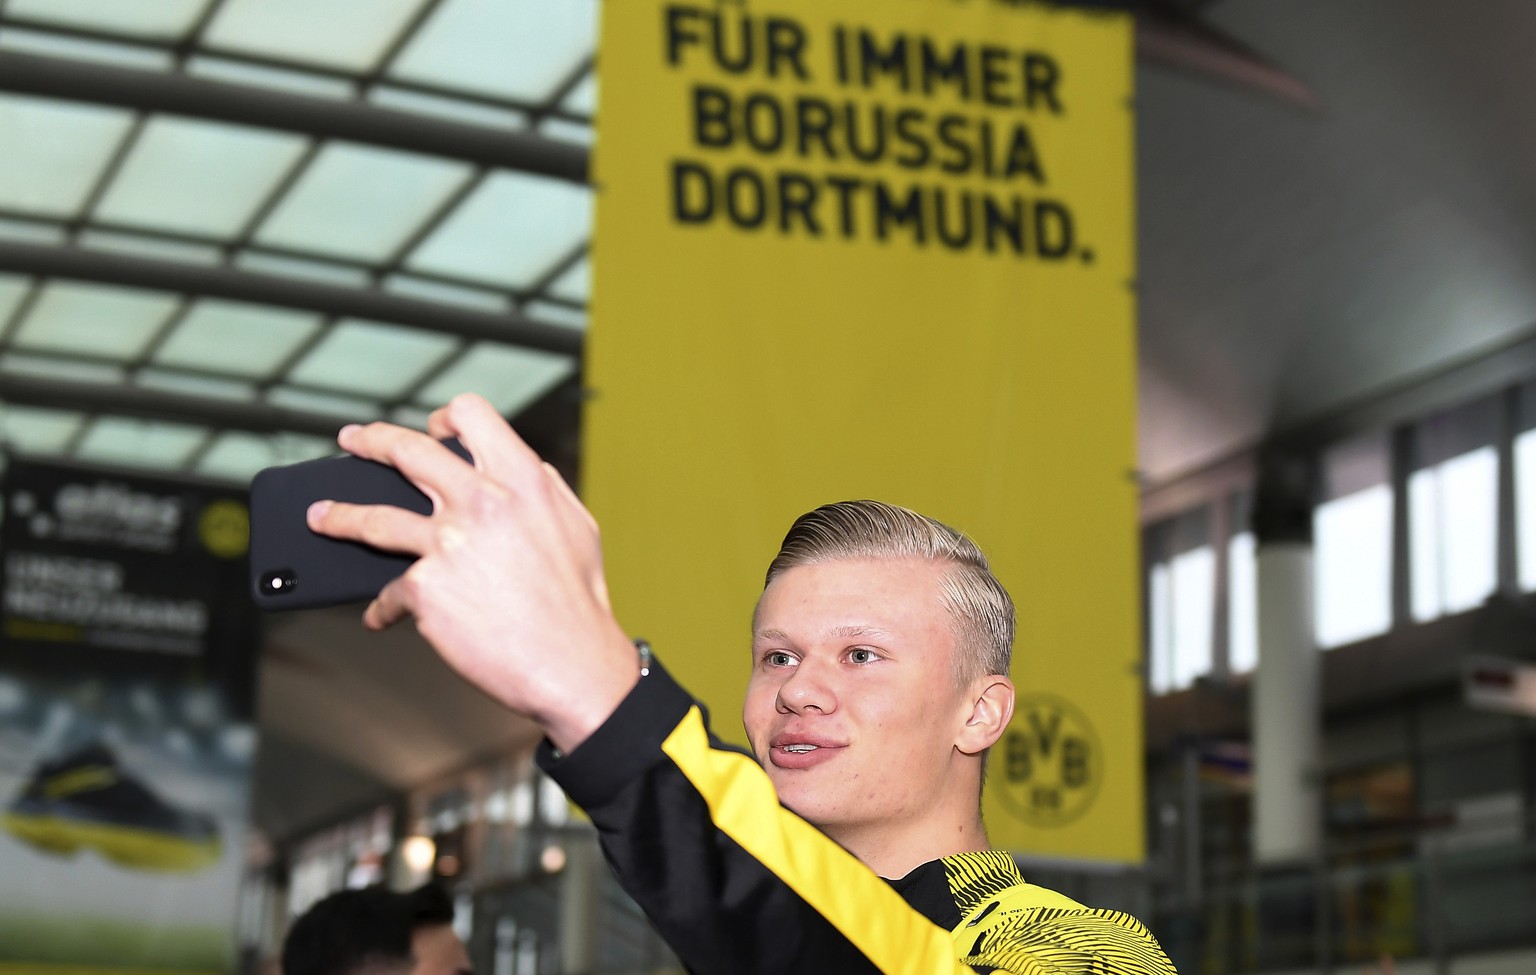 Dortmund&#039;s Erling Haaland makes a selfie of himself with his mobile phone at Dortmund airport before departing to a training camp in Marbella, Dortmund, Germany, Saturday, Jan.4, 2019. (David Ind ...